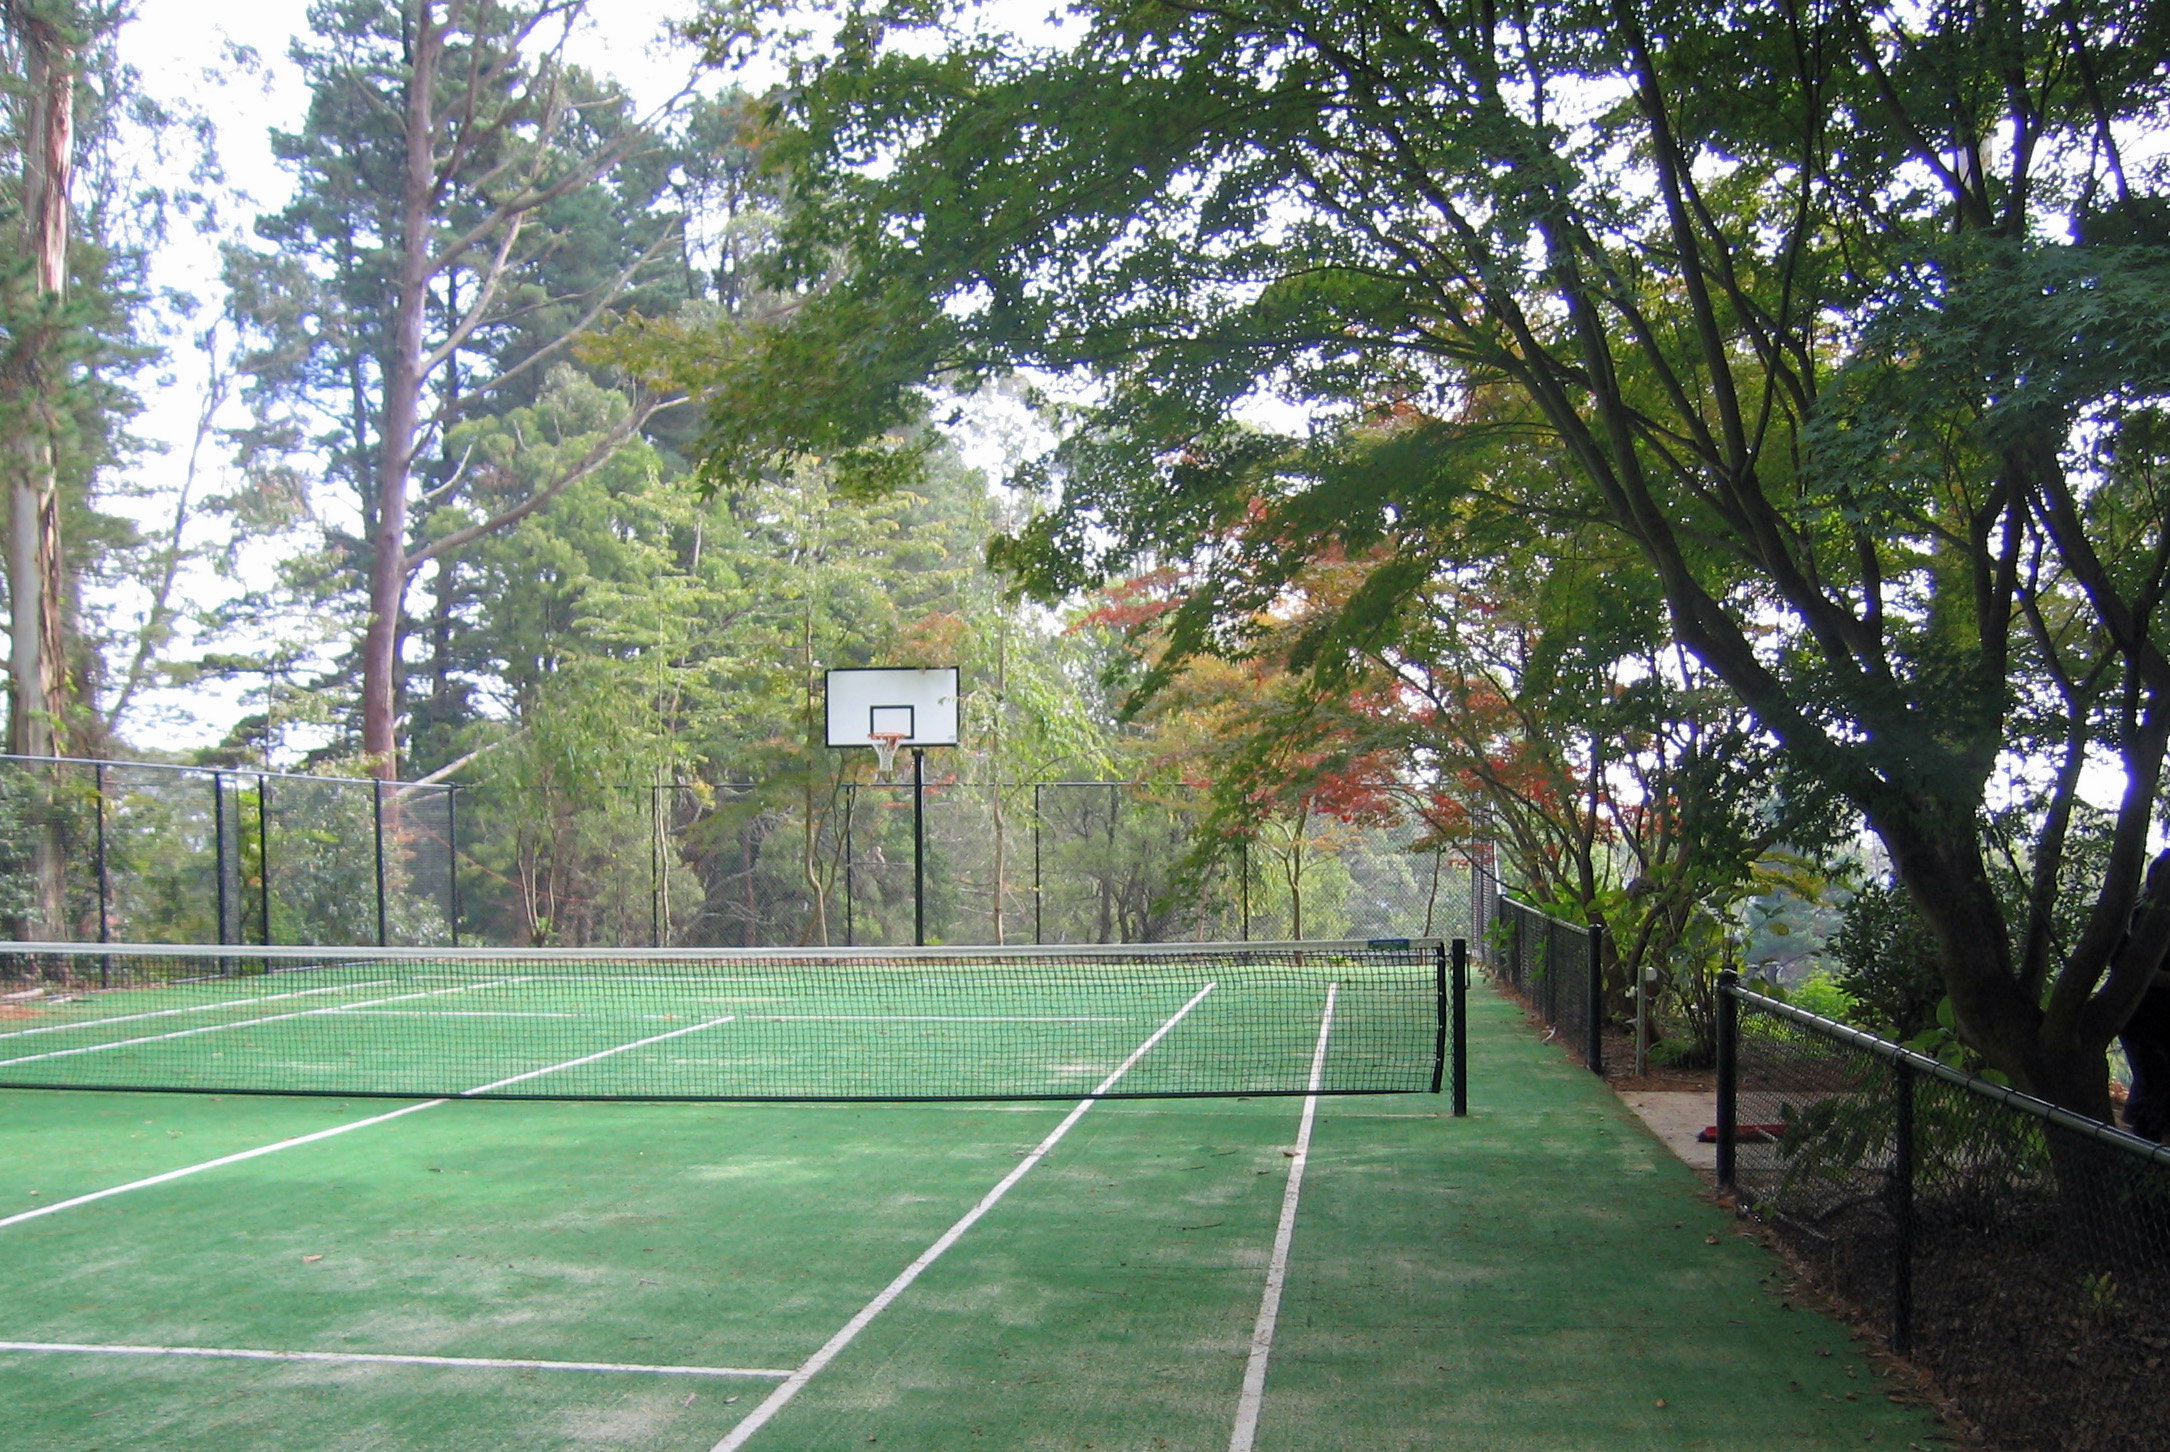 Home Court - Pacific Grass